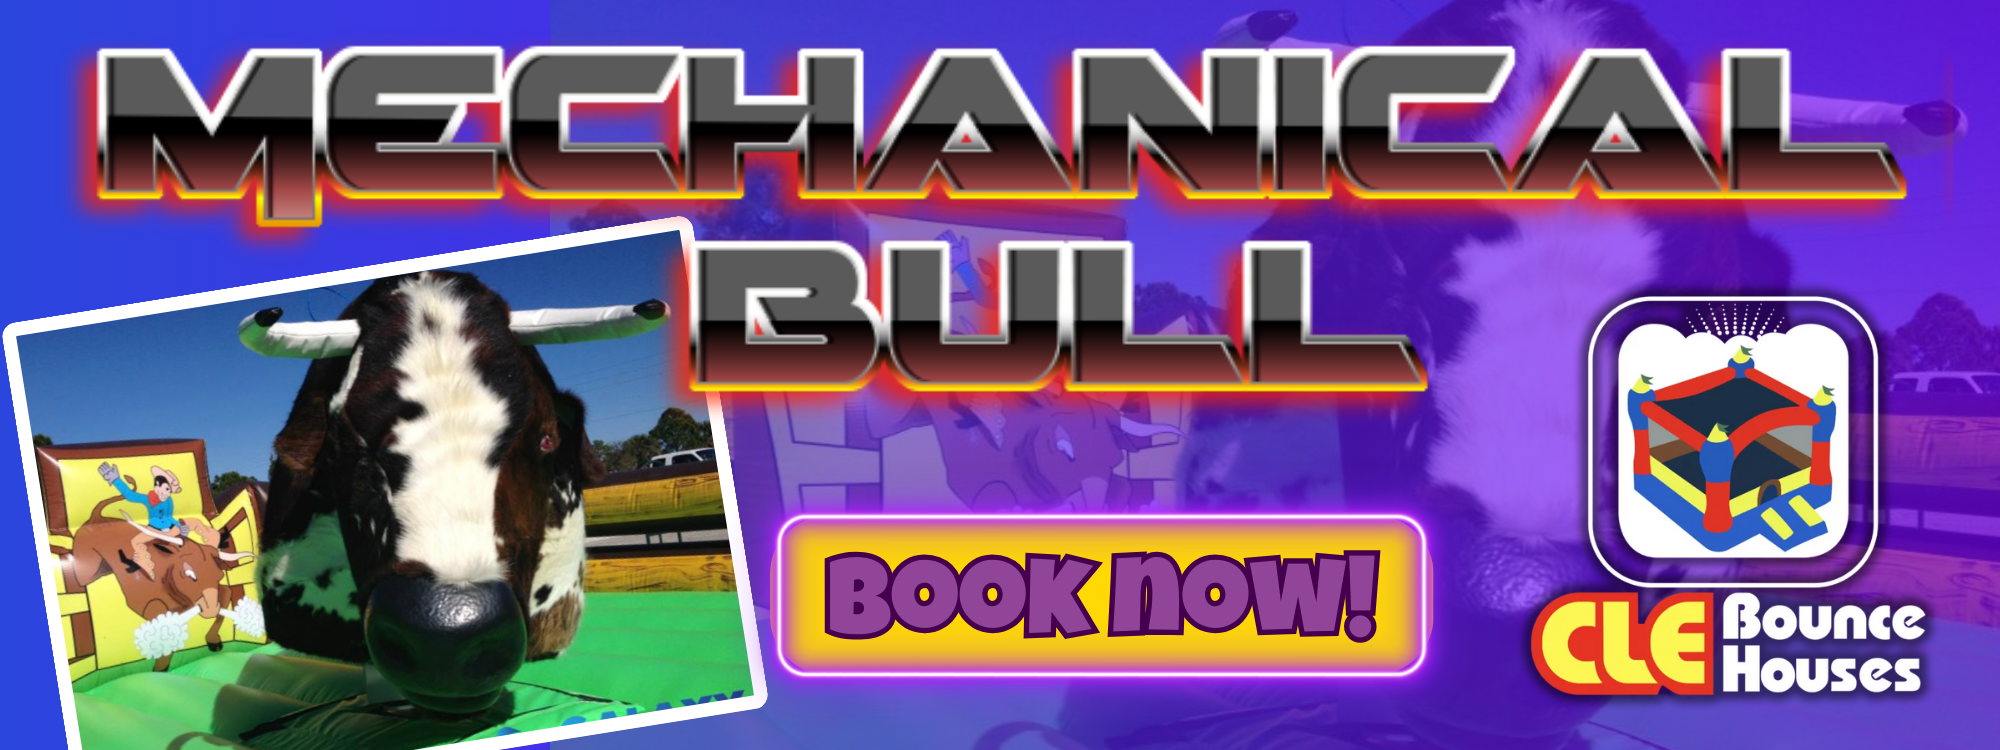 Mechanical Bull Rentals in Cleveland OH - CLE Bounce Houses (2000 x 750 px)